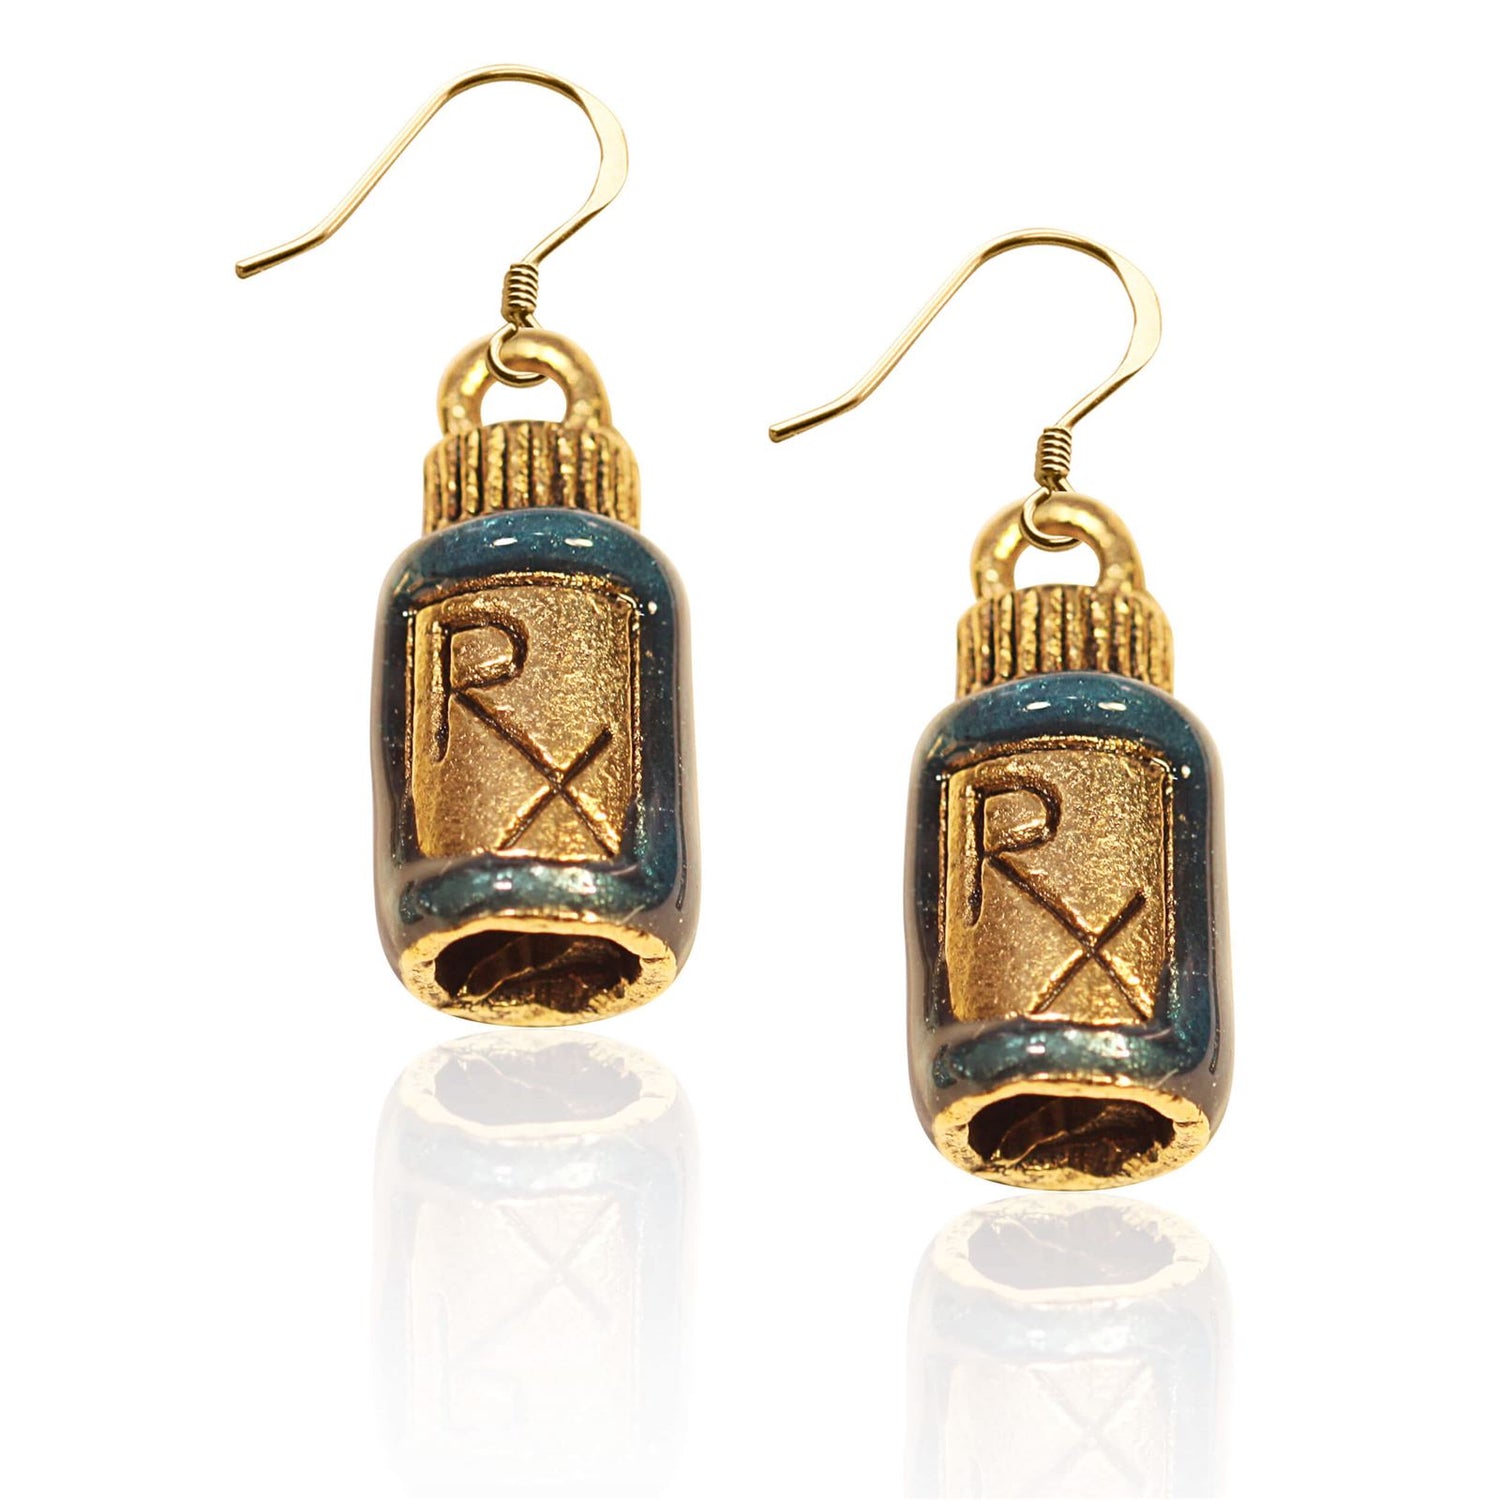 Whimsical Gifts | RX Charm Earrings in Gold Finish | Professions Themed | Dental | Medical | First Responder | Jewelry